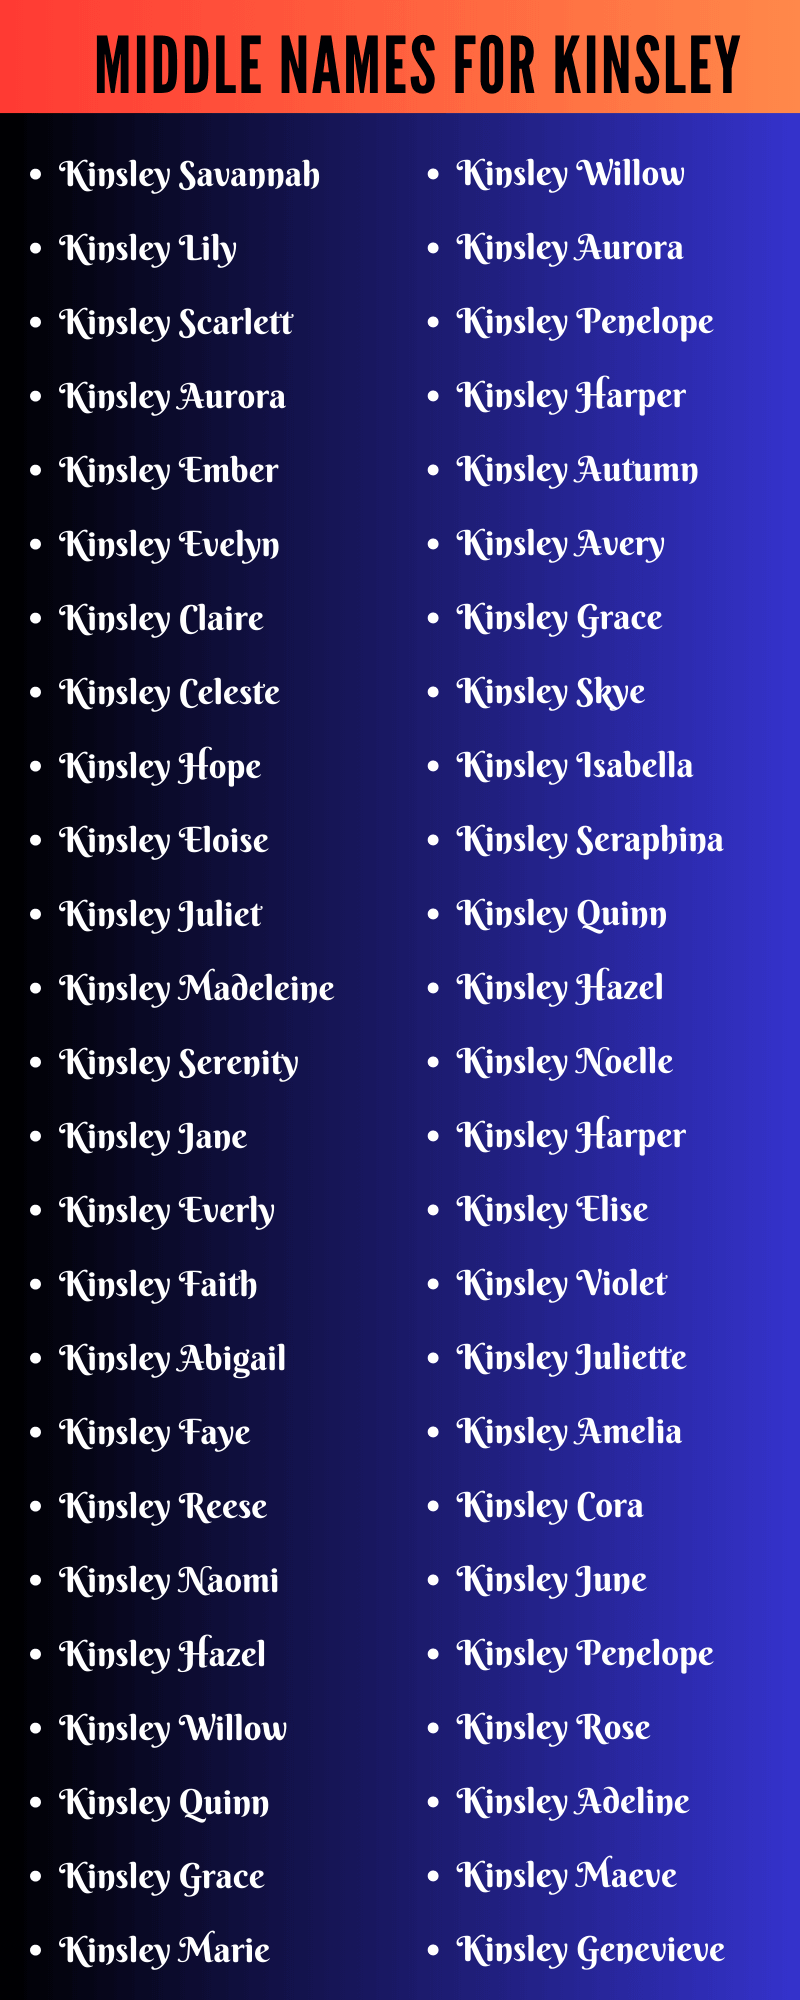 Middle Names For Kinsley